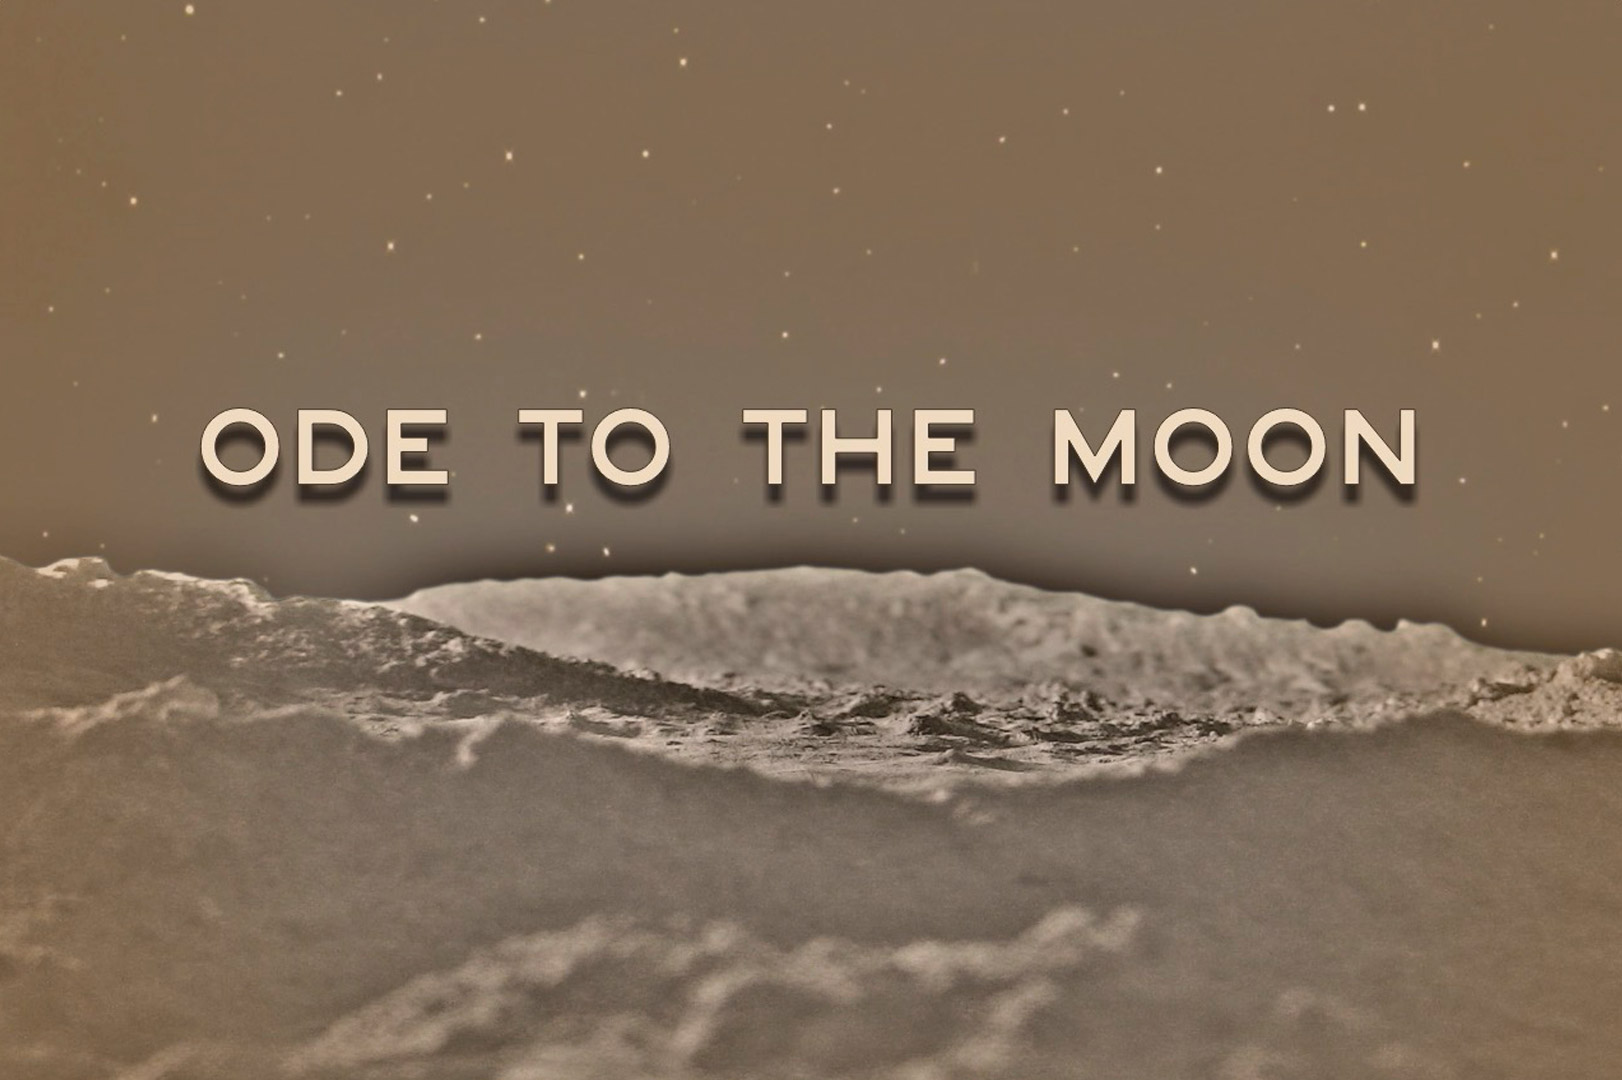 Ode to the Moon